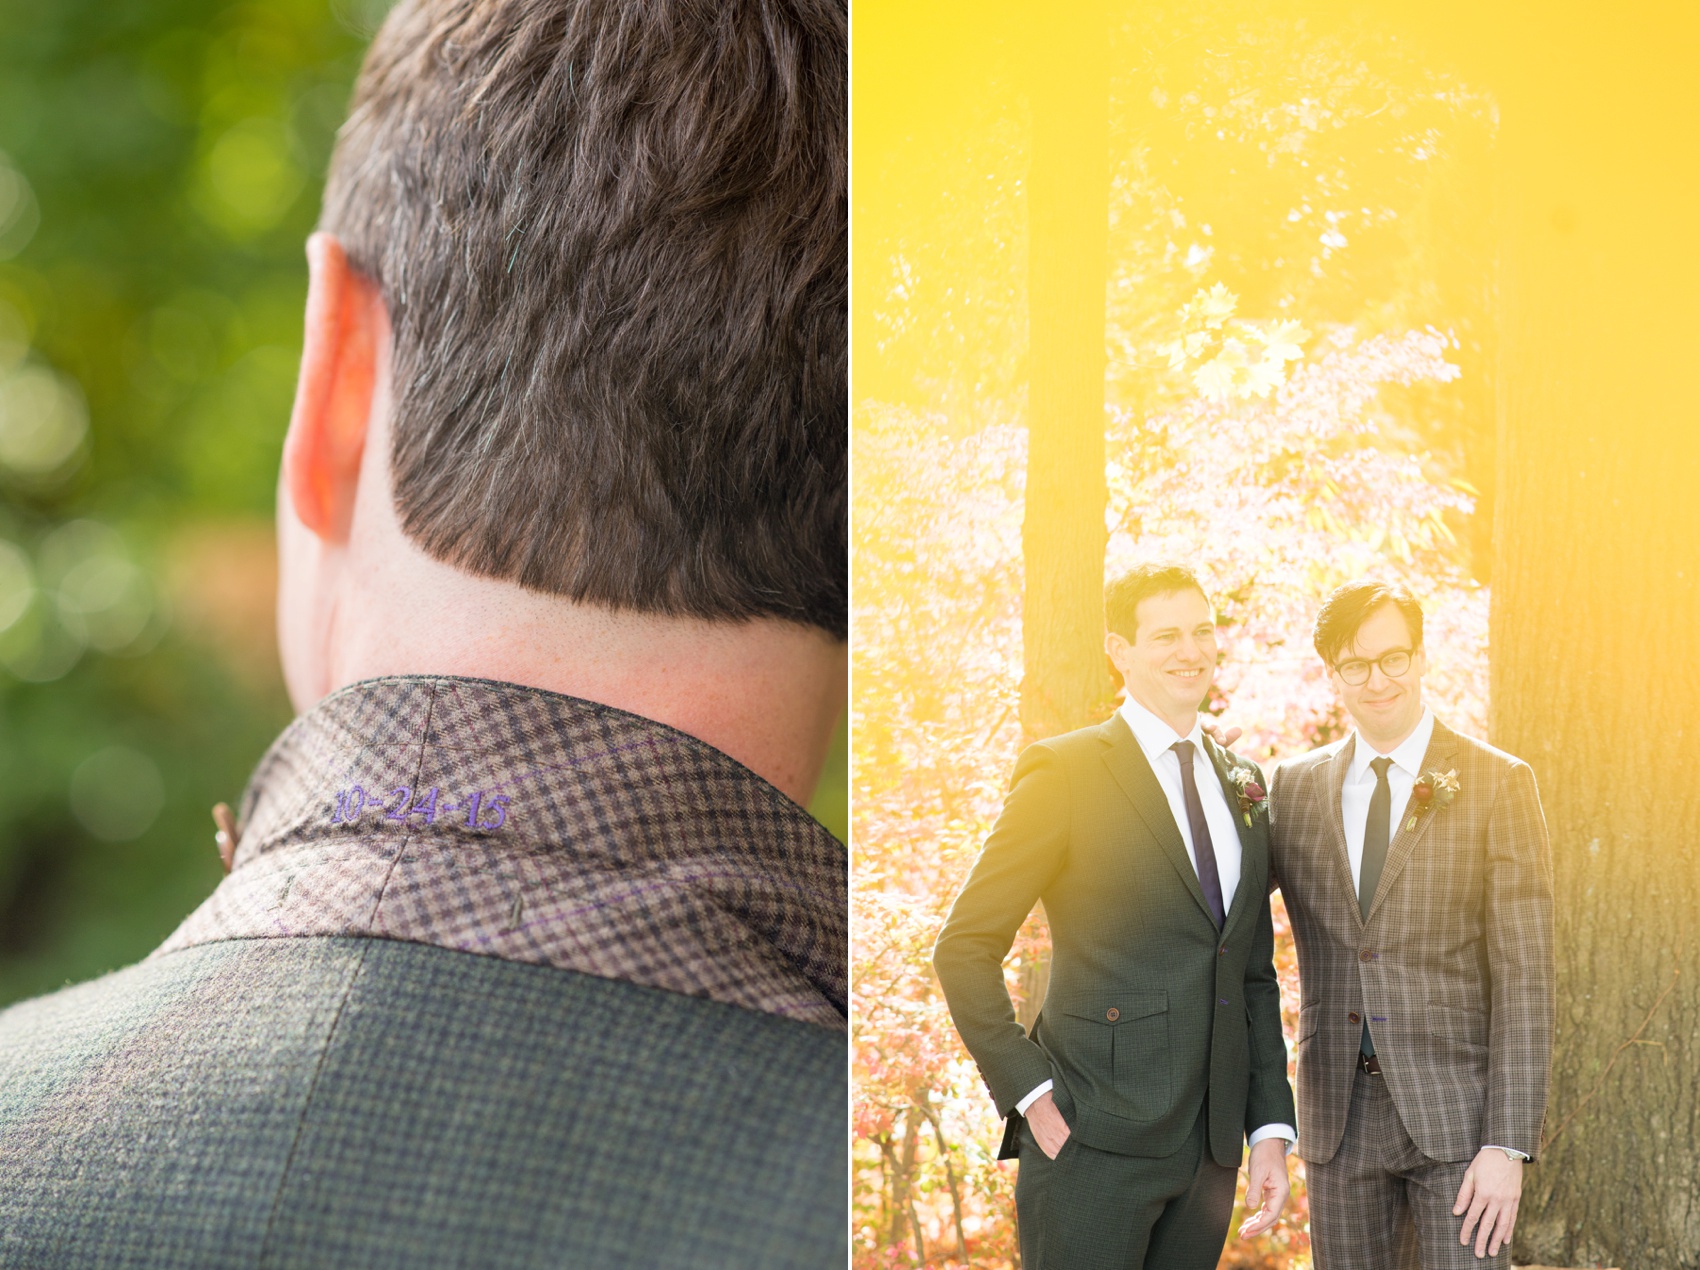 Crabtree Kittle's House wedding in NY. Images by Mikkel Paige Photography for a gay fall wedding. Wedding date embroidery in custom suite by Sebastian Grey.